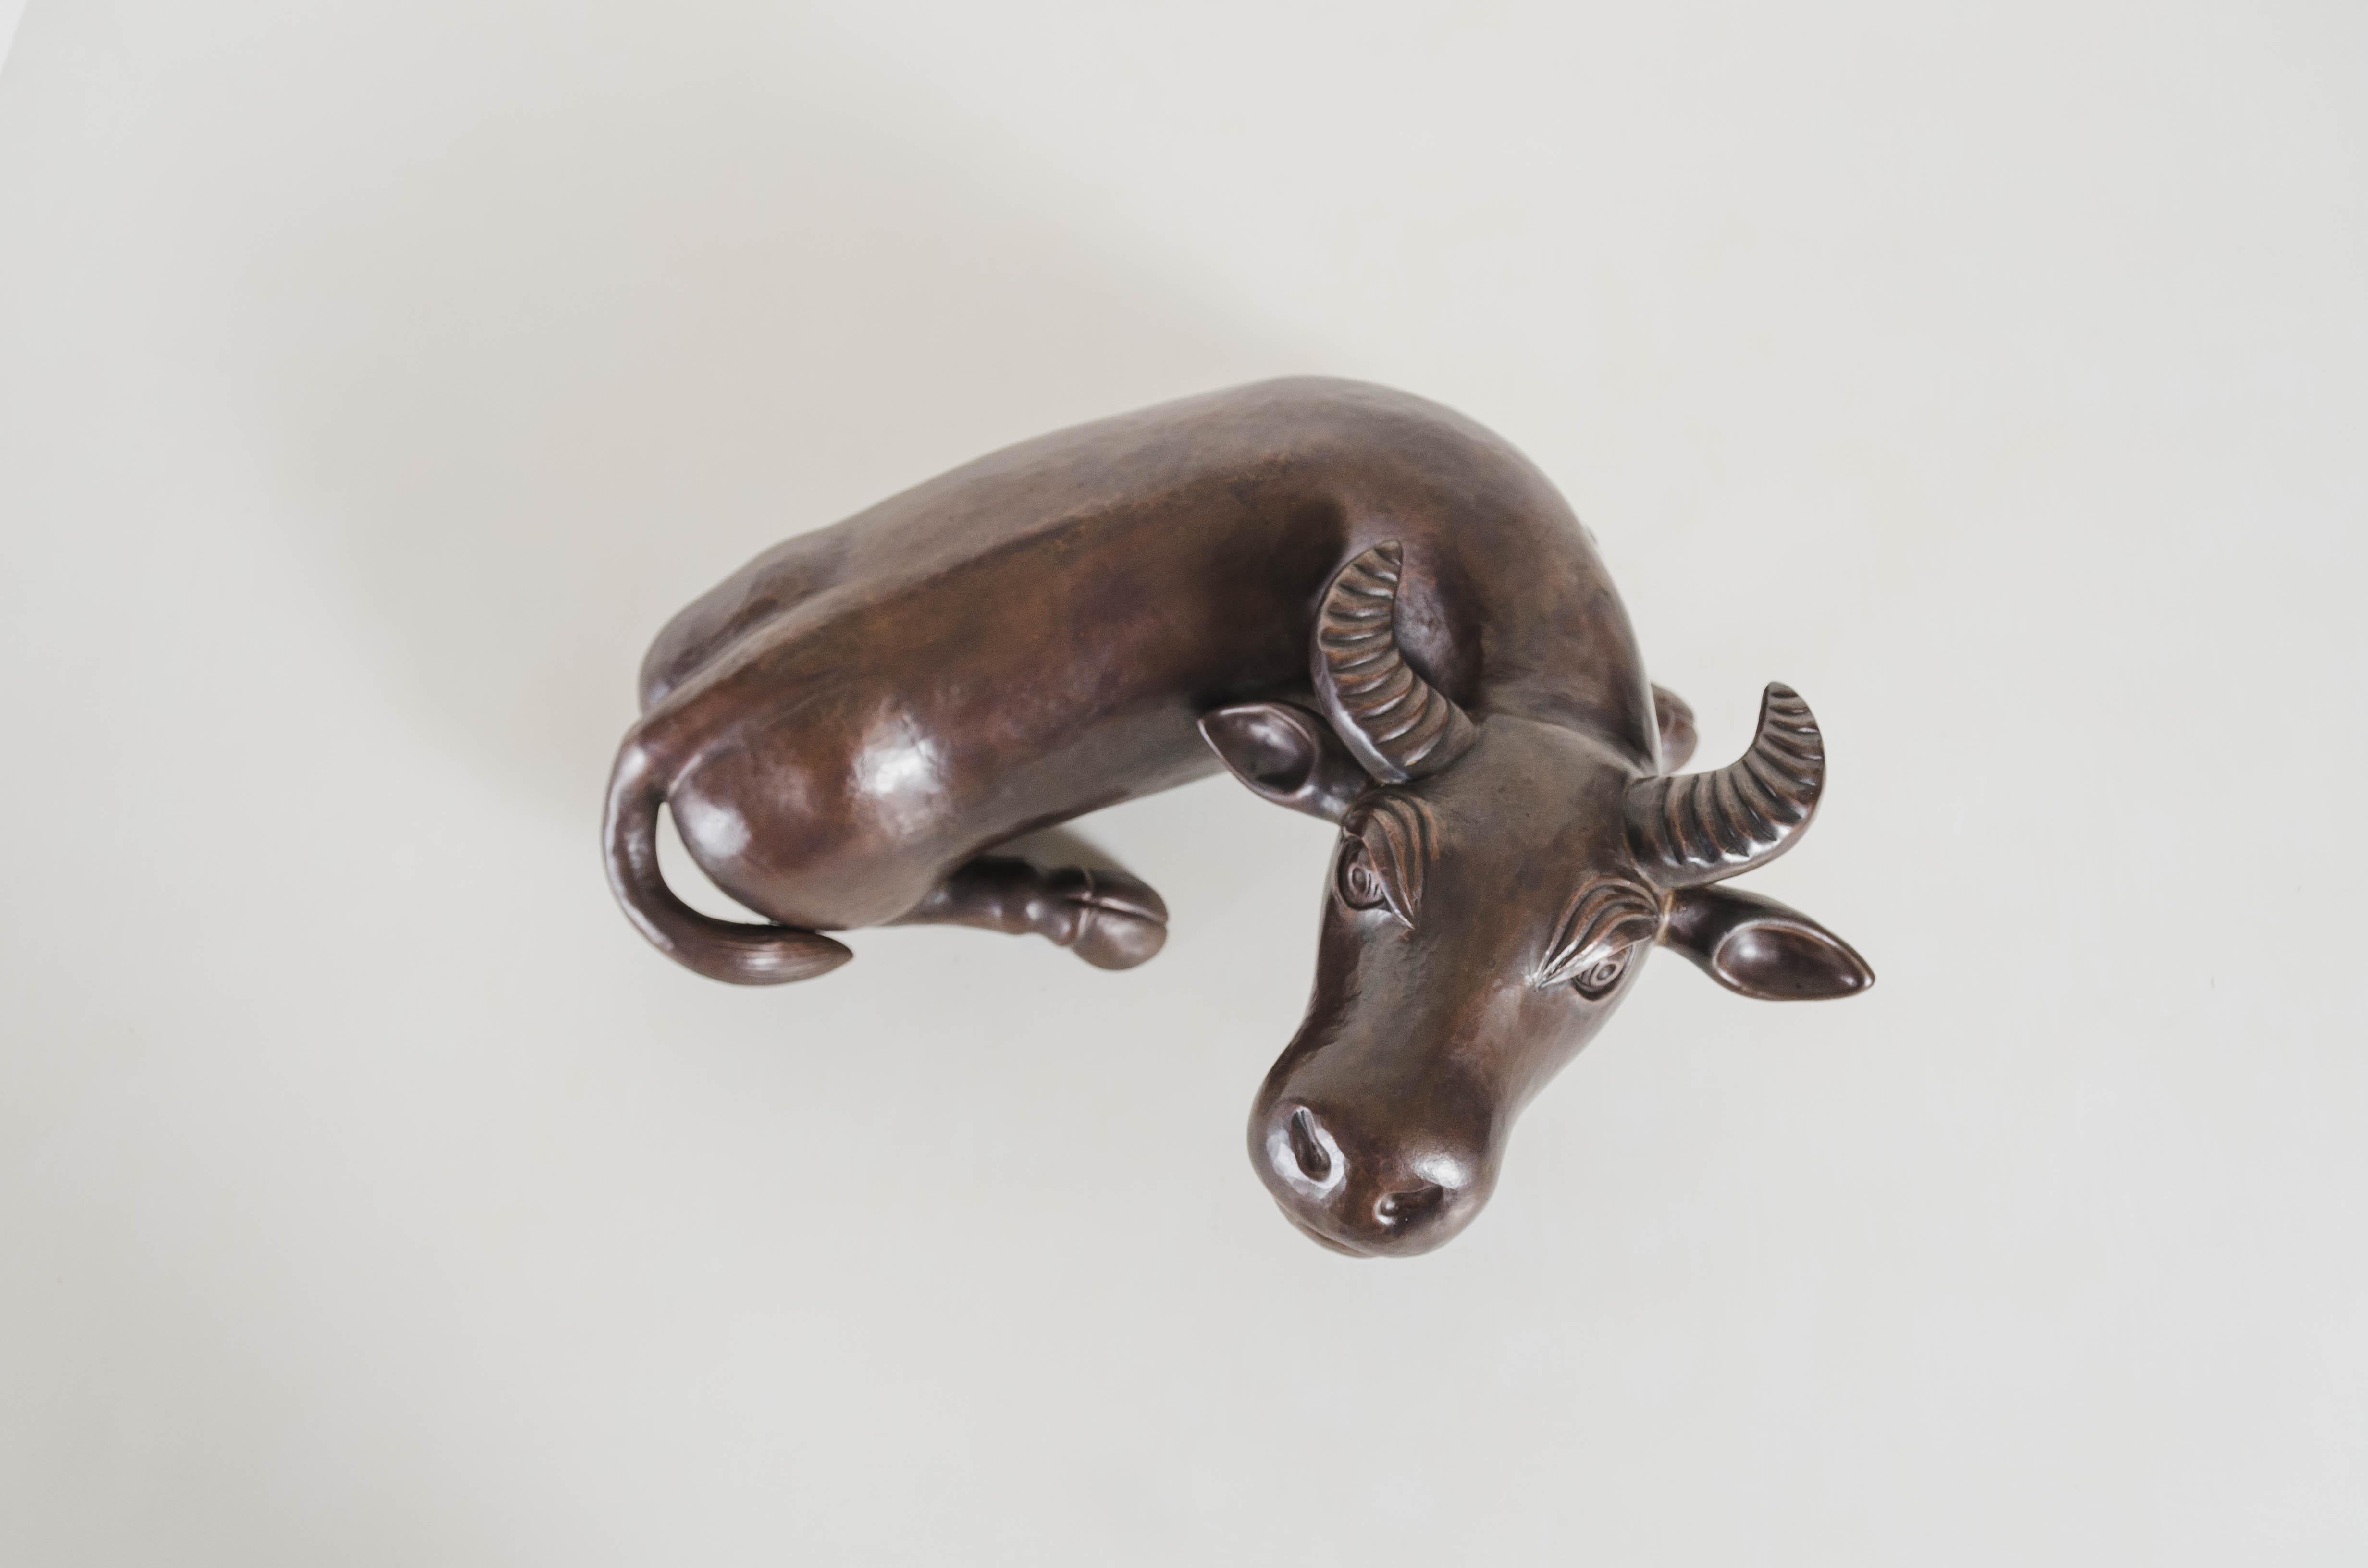 Contemporary Hand Repoussé Water Ox Sculpture in Antique Copper by Robert Kuo For Sale 2